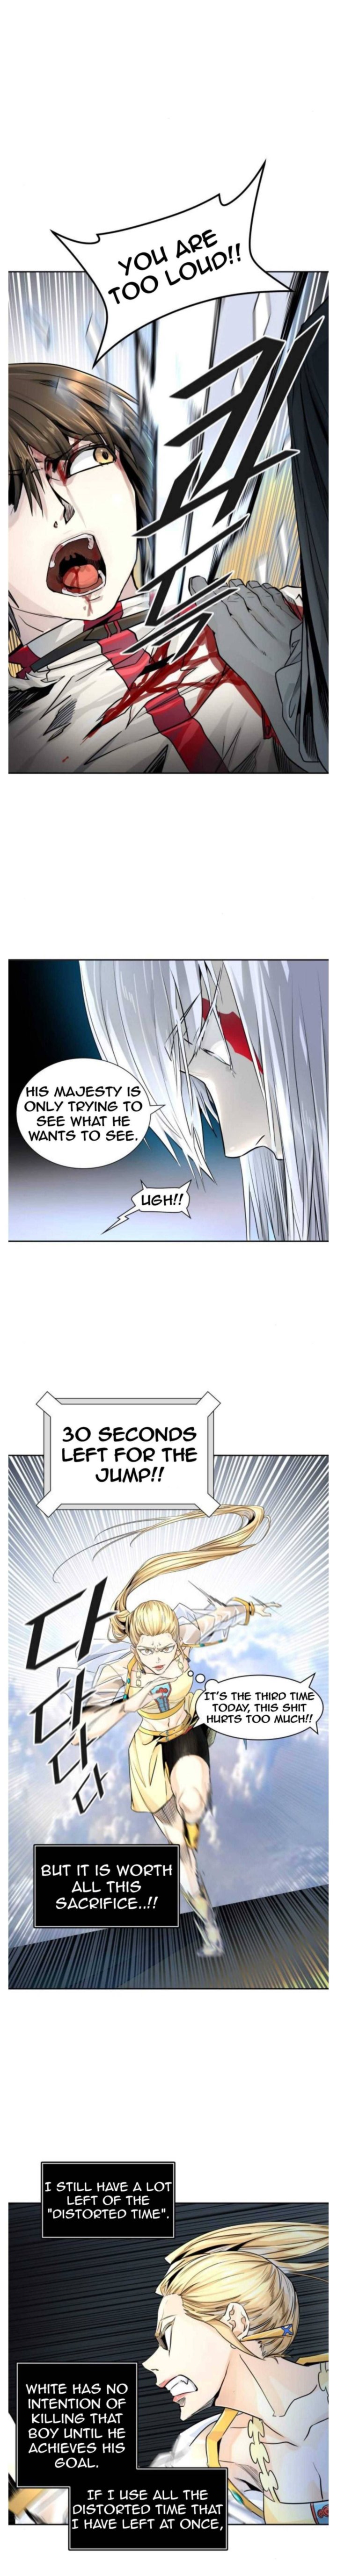 Tower Of God 498 22